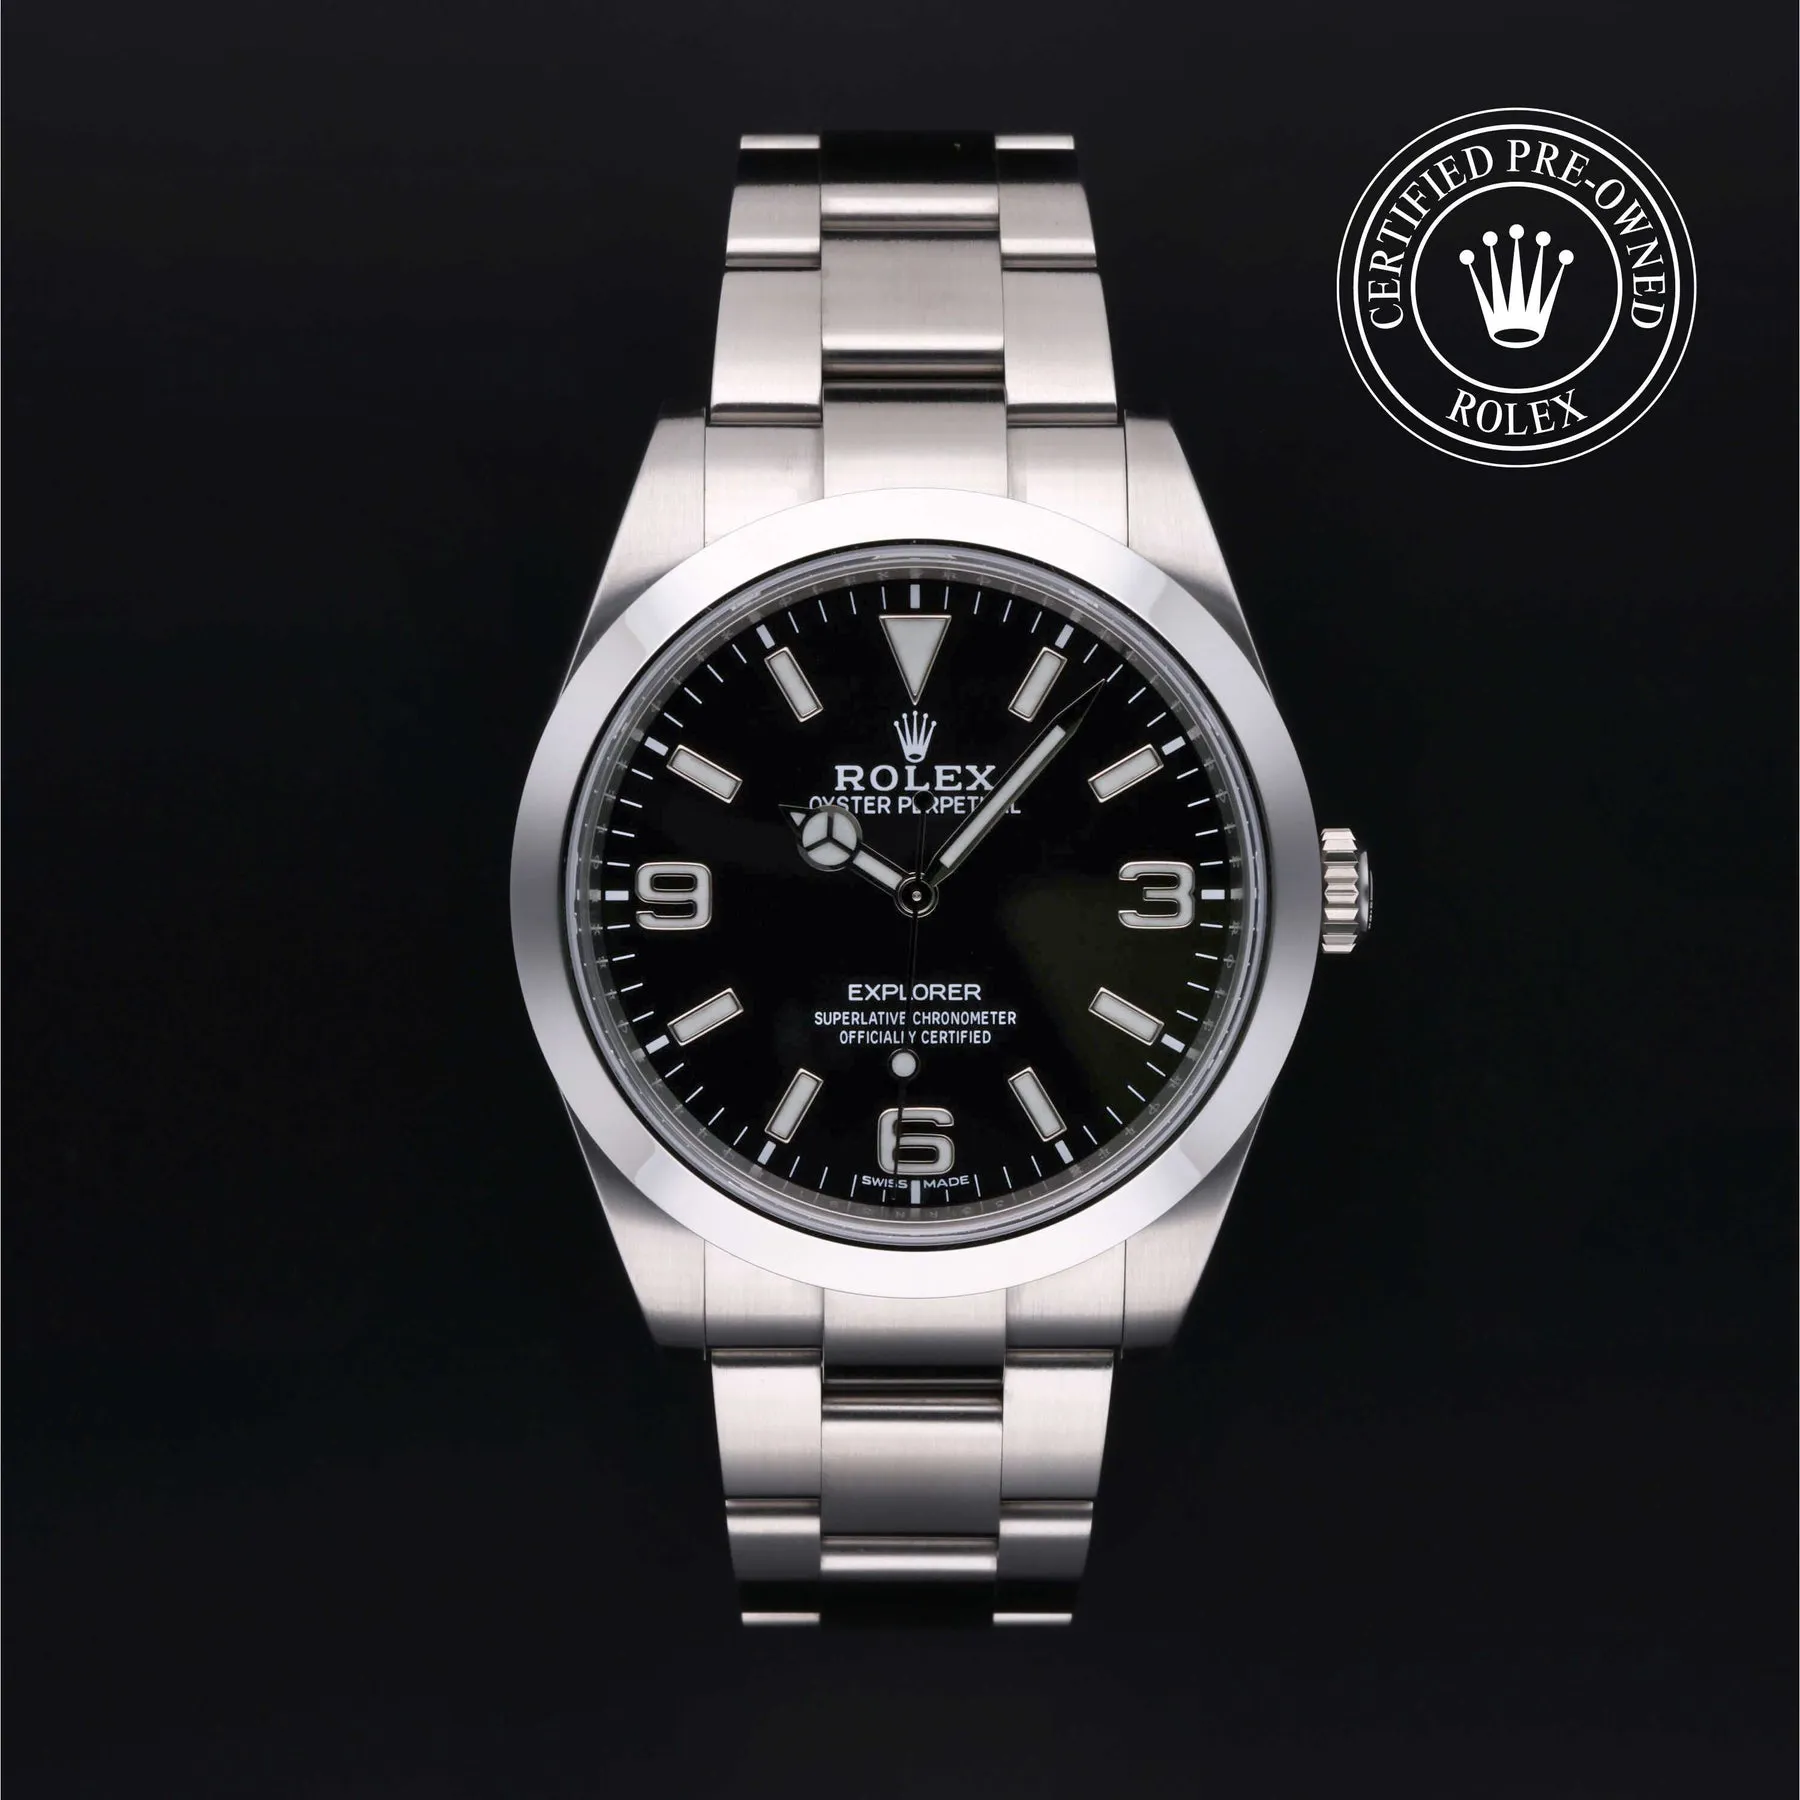 Rolex Oyster Perpetual Explorer 214270 39mm Stainless steel Black